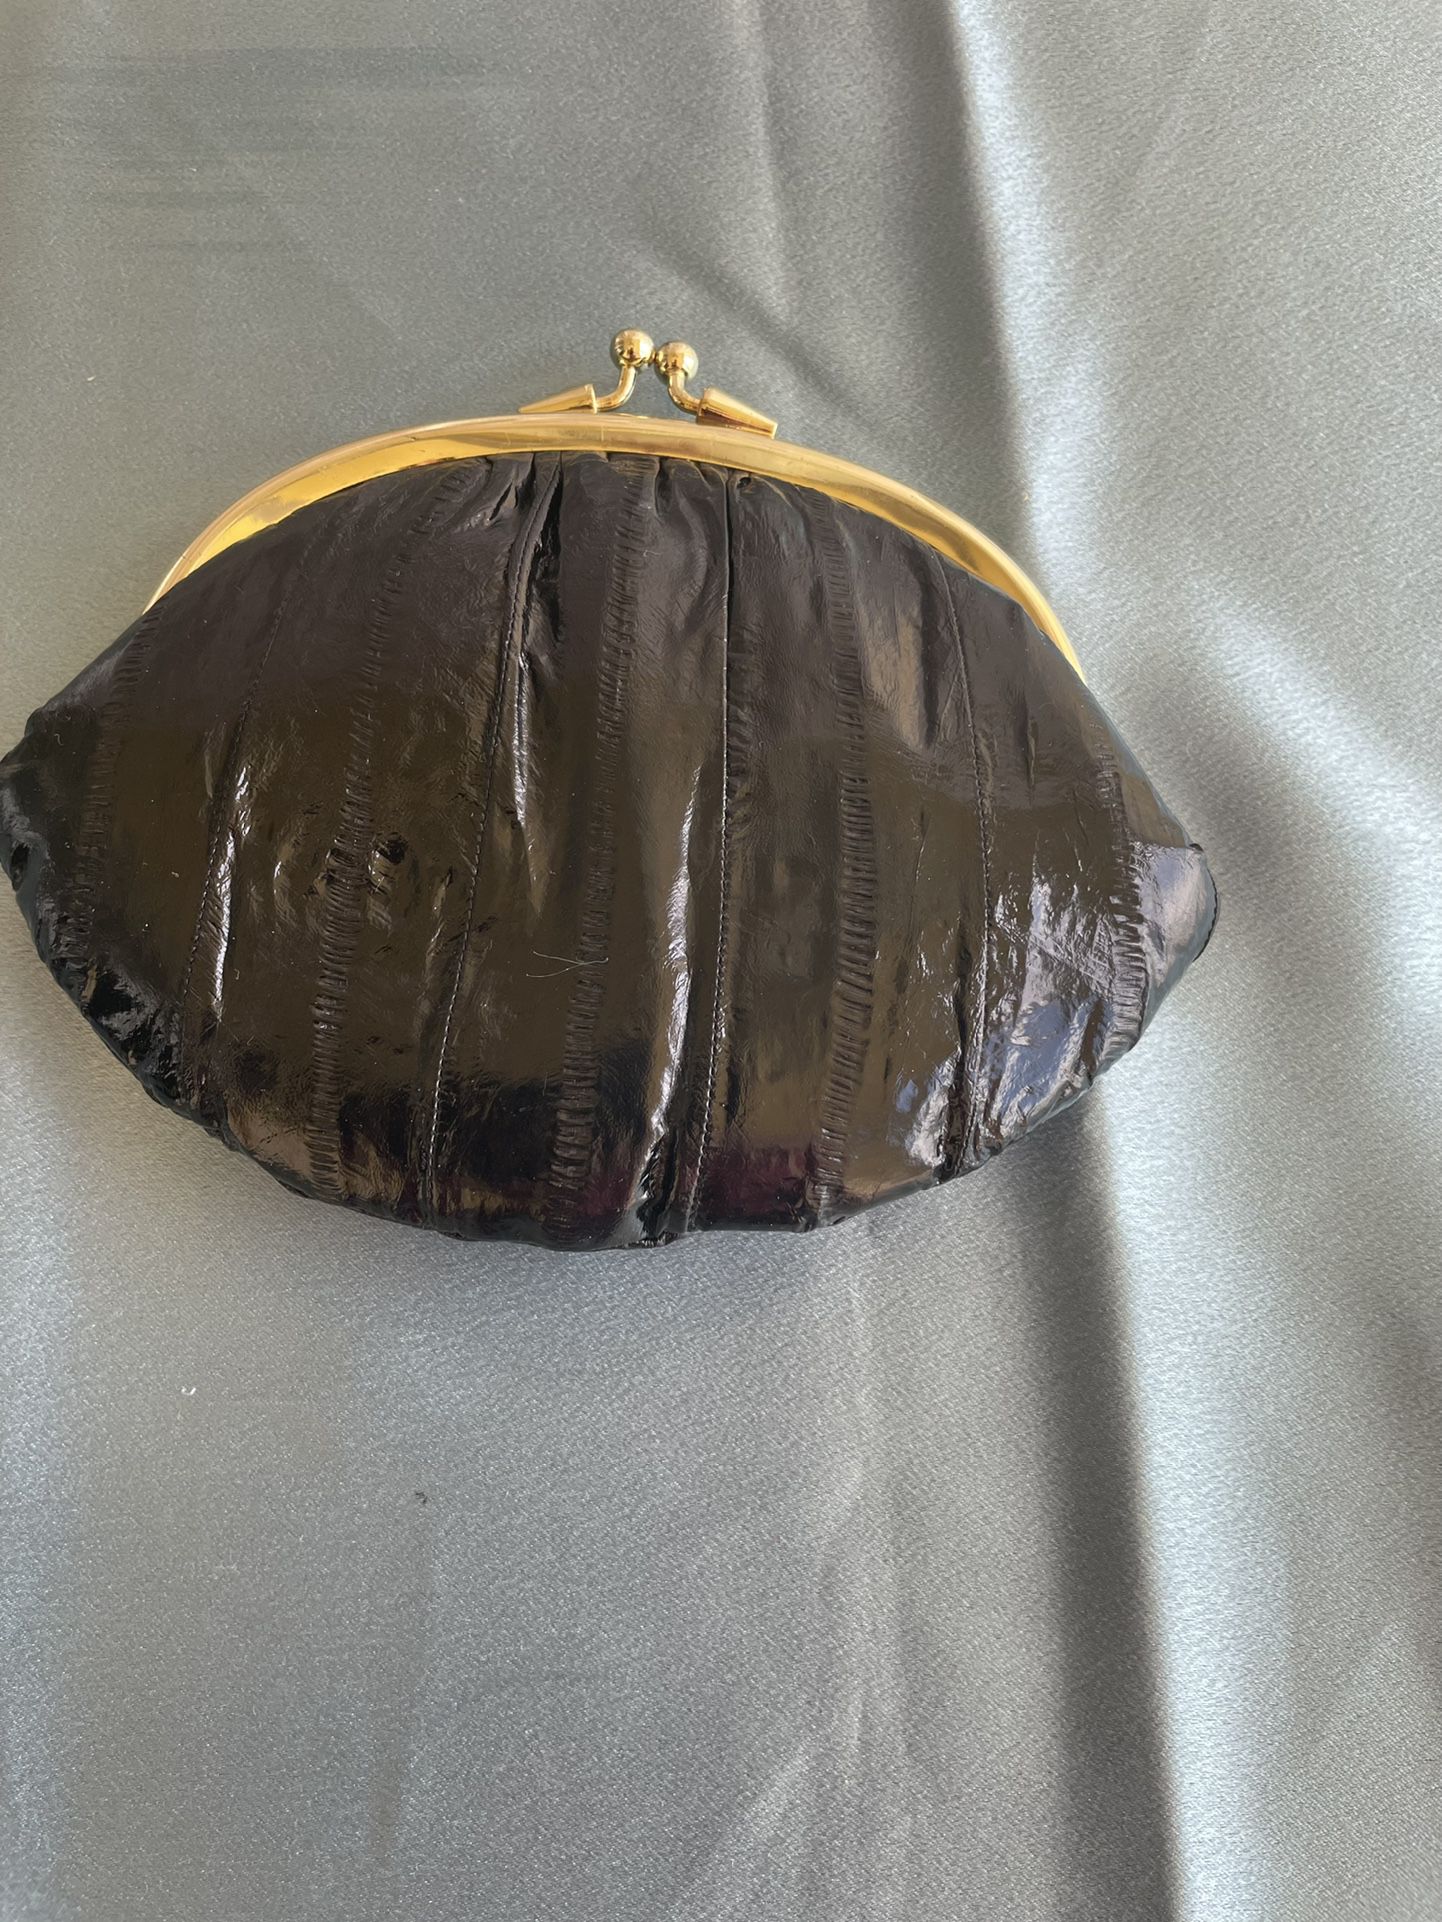 Vintage circa 1970s 1980s genuine eel skin small clutch. Made in Korea.